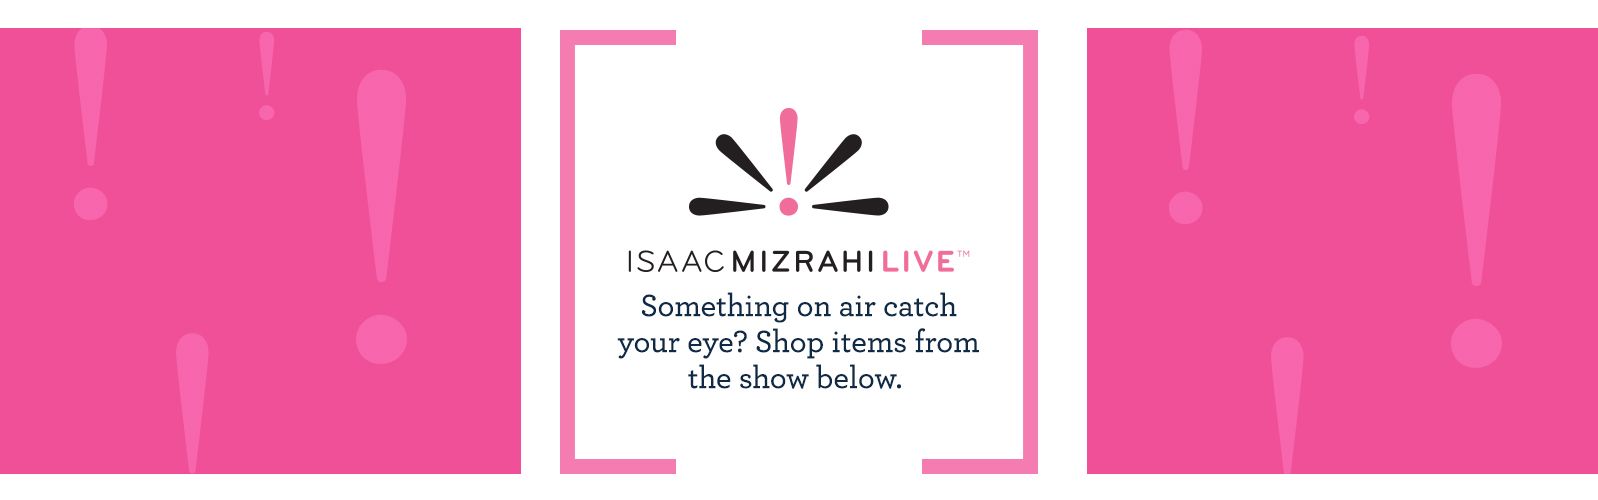 Isaac Mizrahi Live!™.  Something on air catch your eye? Shop items from the show below.